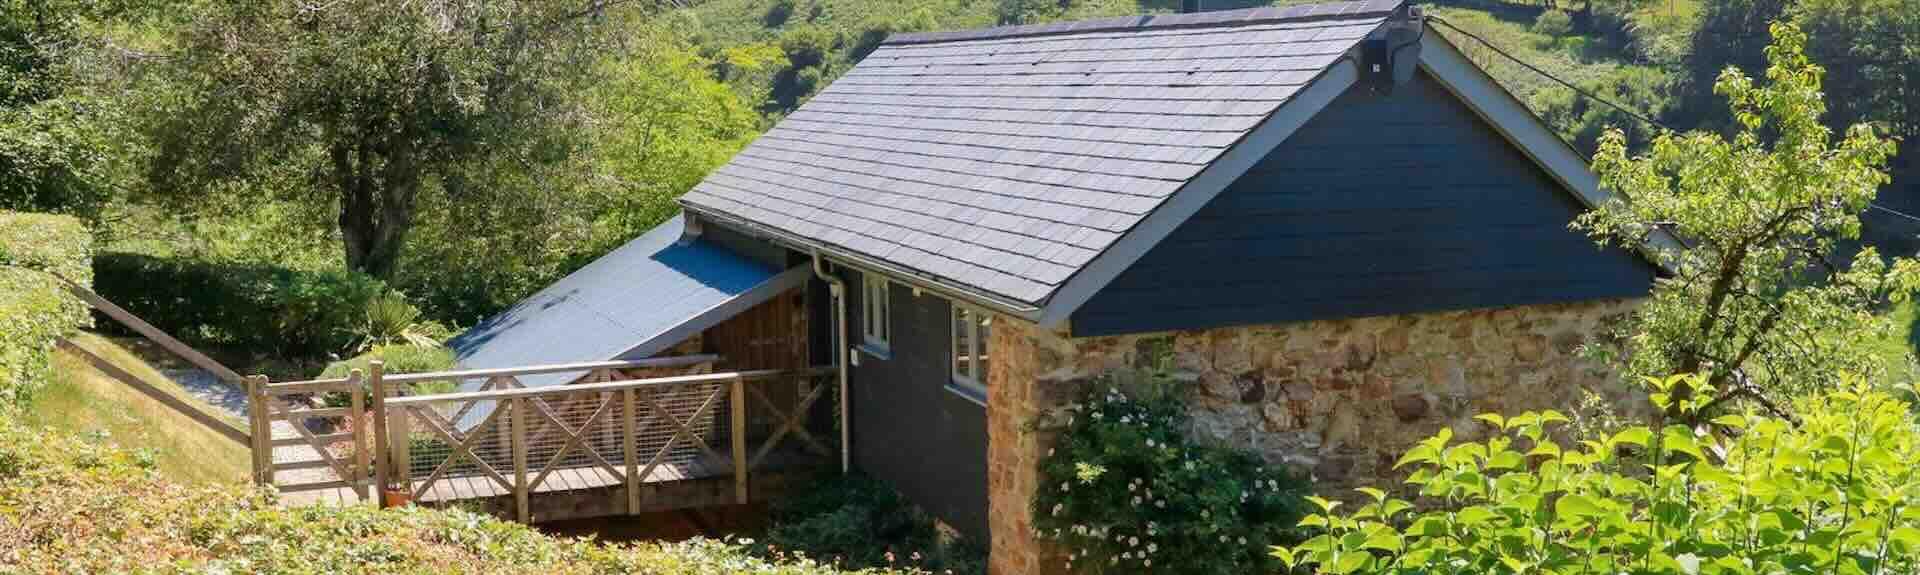 A single-storey, stone-built, luxury Exmoor barn conversion surrounded by trees and hedgerows.